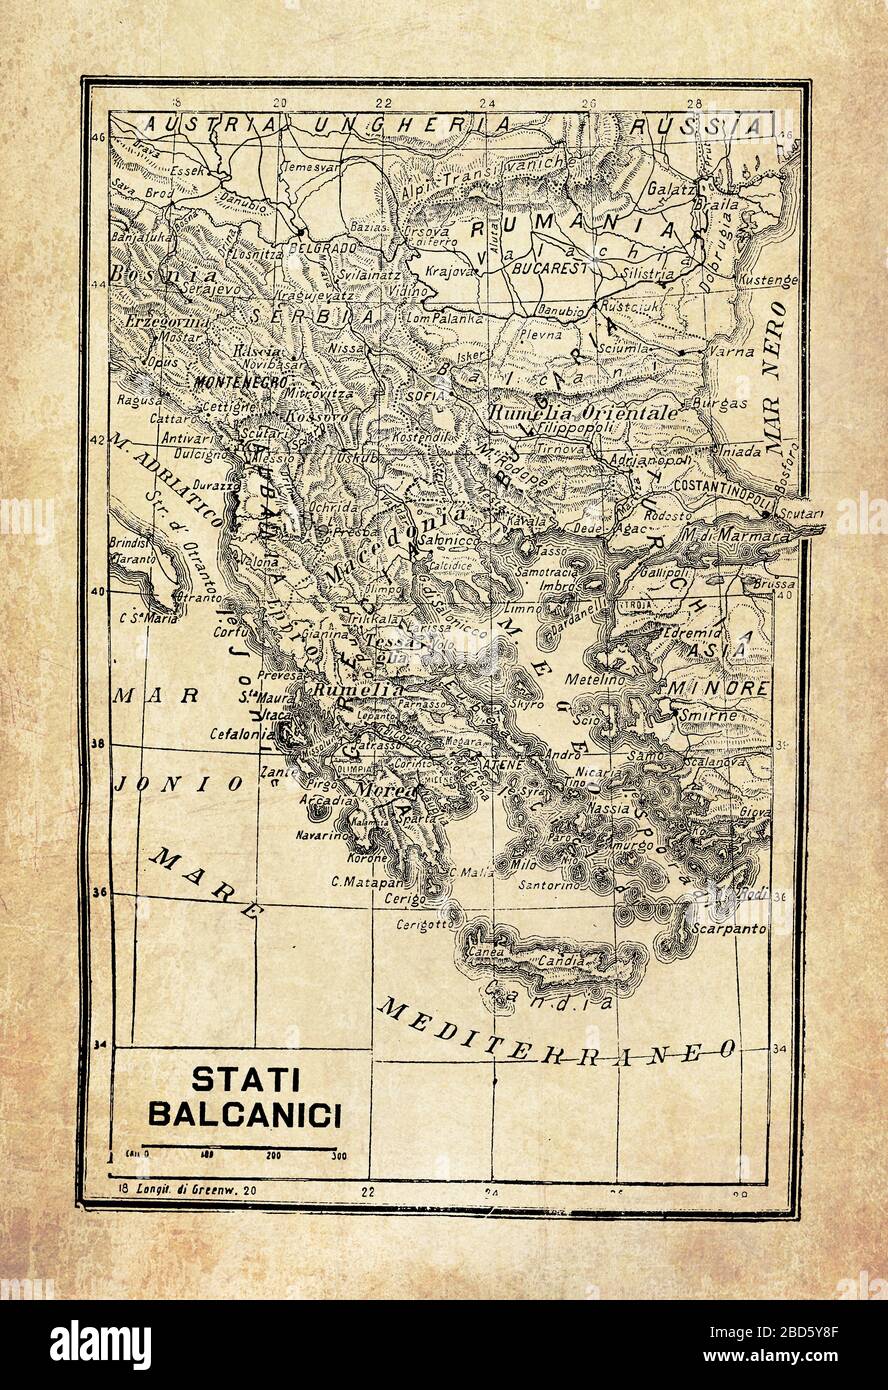 Ancient map of Balkan Peninsula in Southeast Europe and the seas and islands surrounding it with geographical Italian names and descriptions Stock Photo